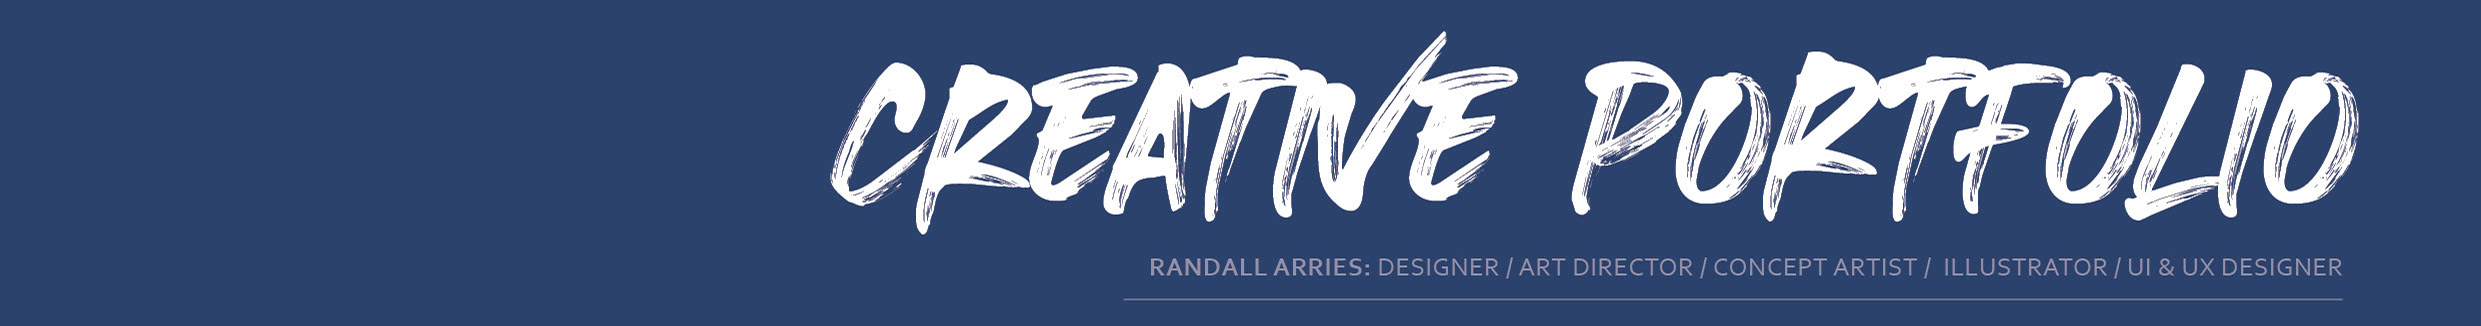 Randall Arries's profile banner